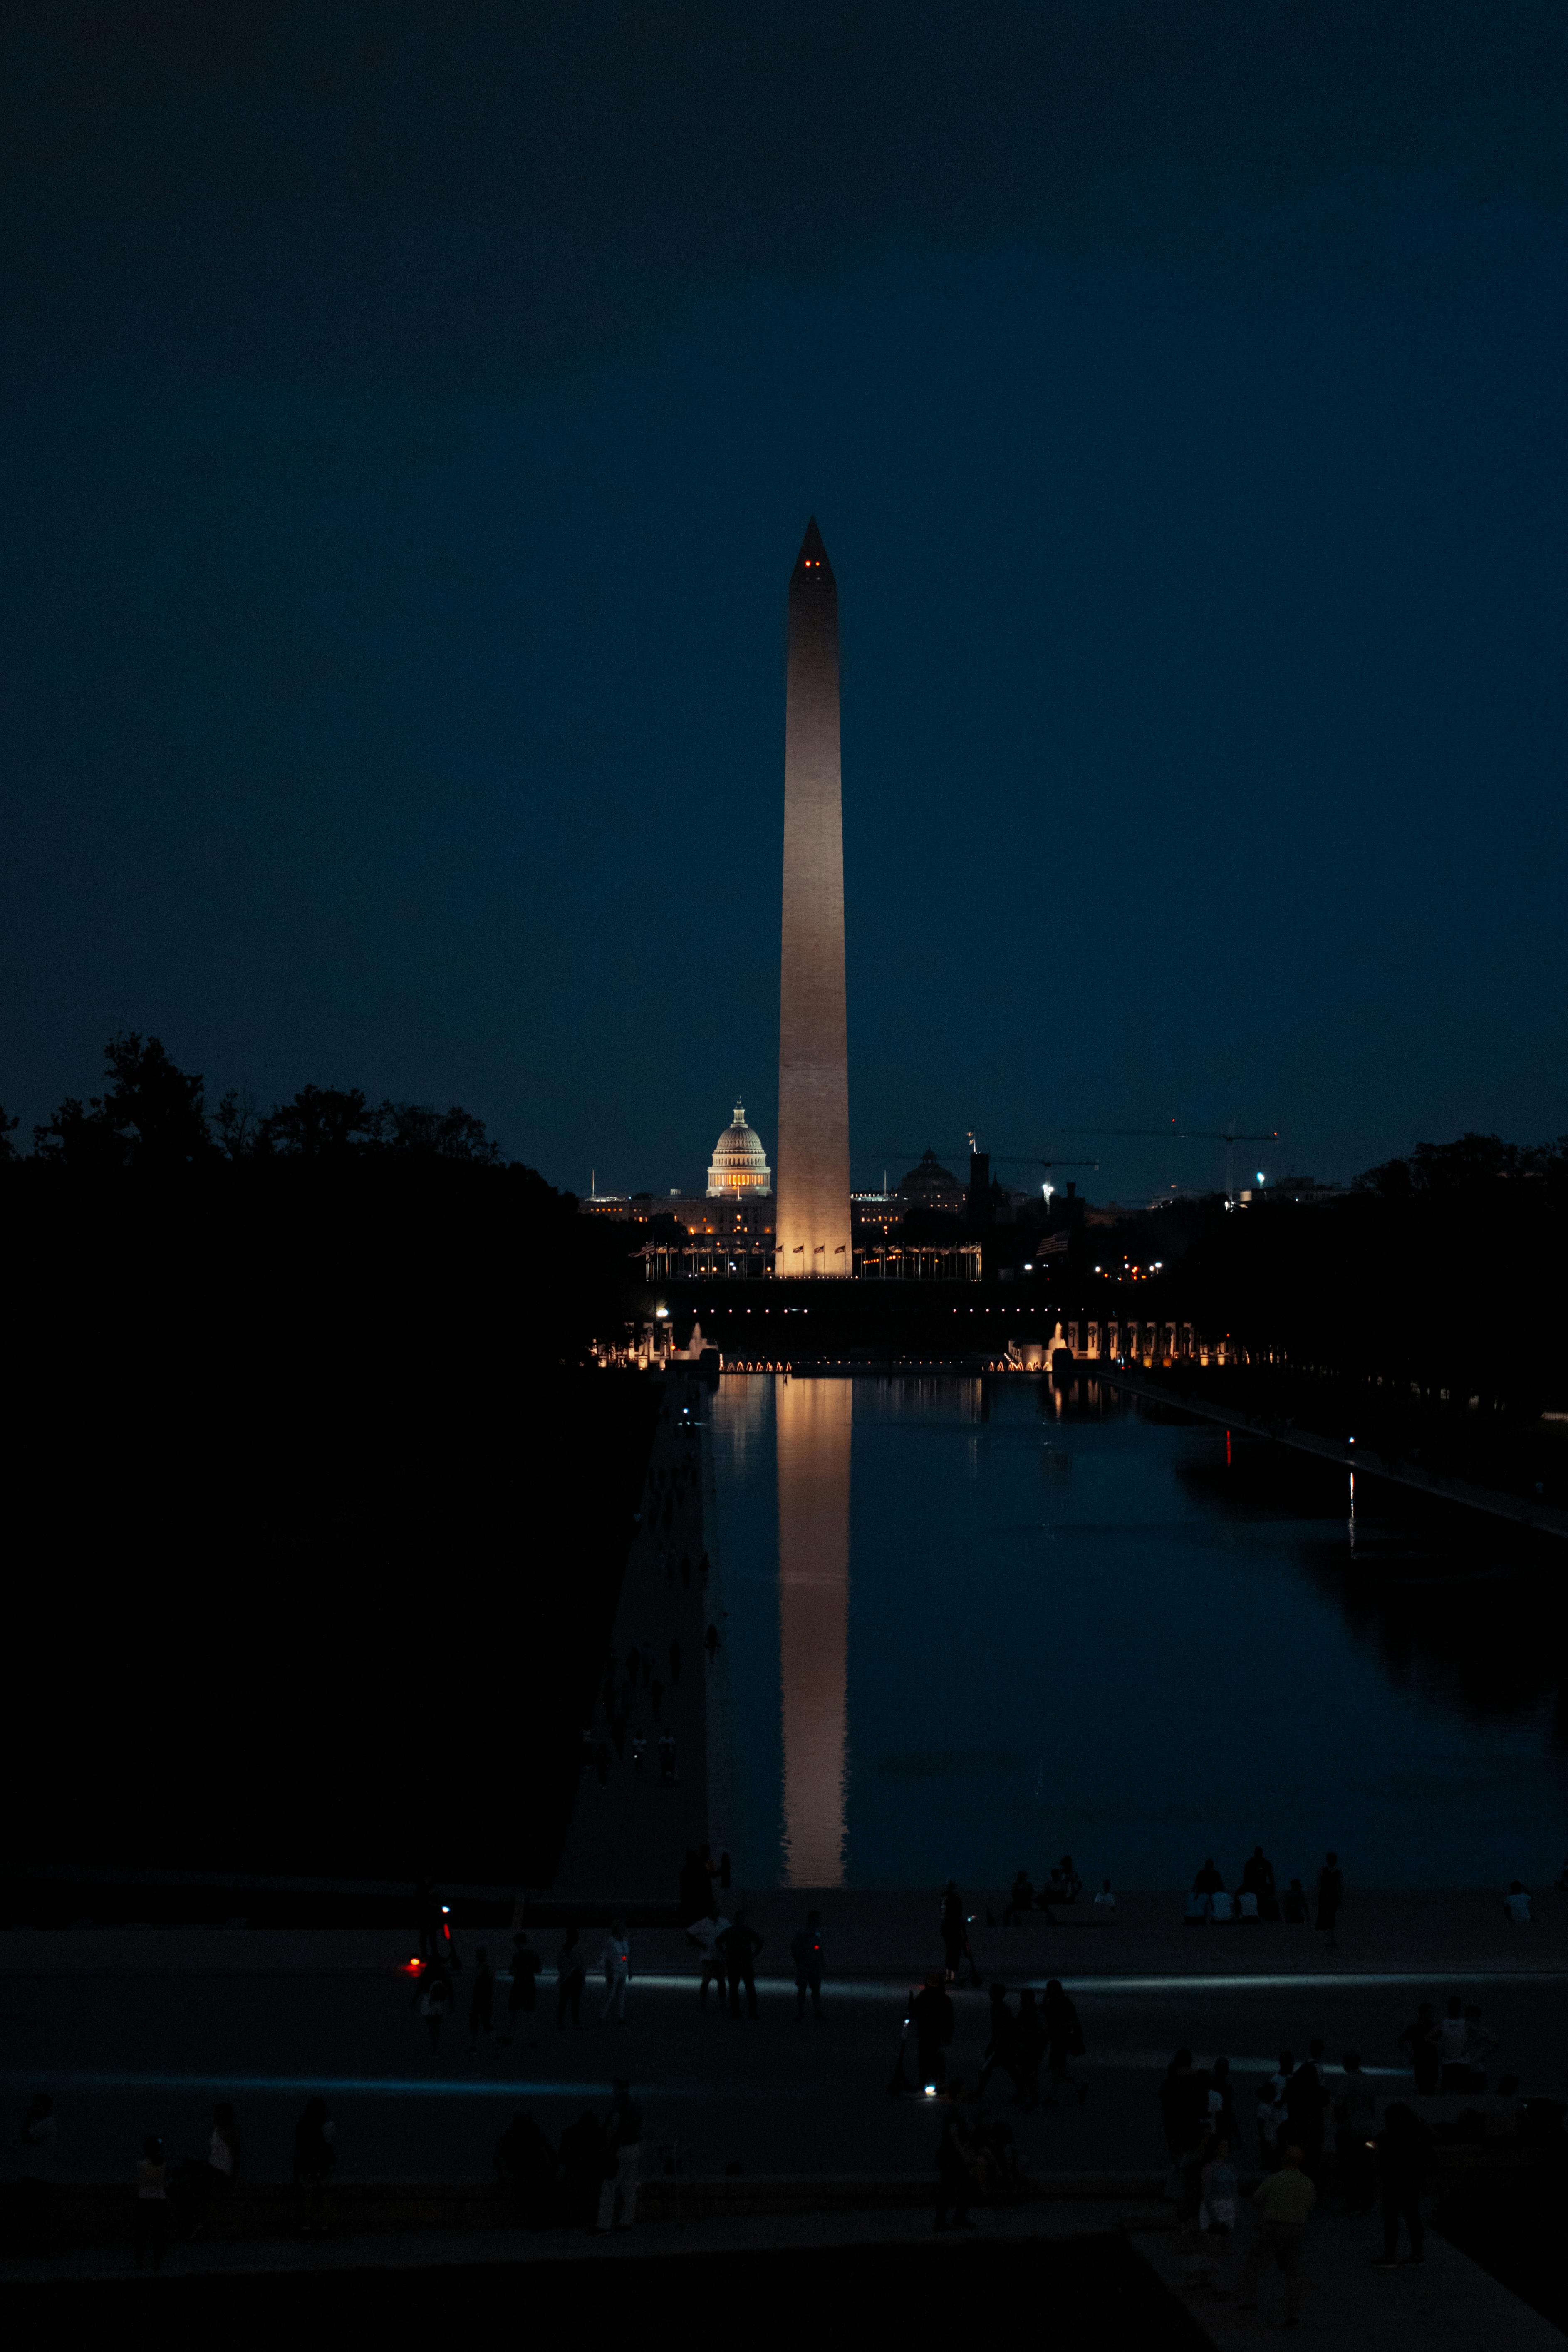 architecture Building City Washington DC Washington Monument  Lincoln Memorial USA Sunset Column Trees Reflection HD Wallpapers   Desktop and Mobile Images  Photos